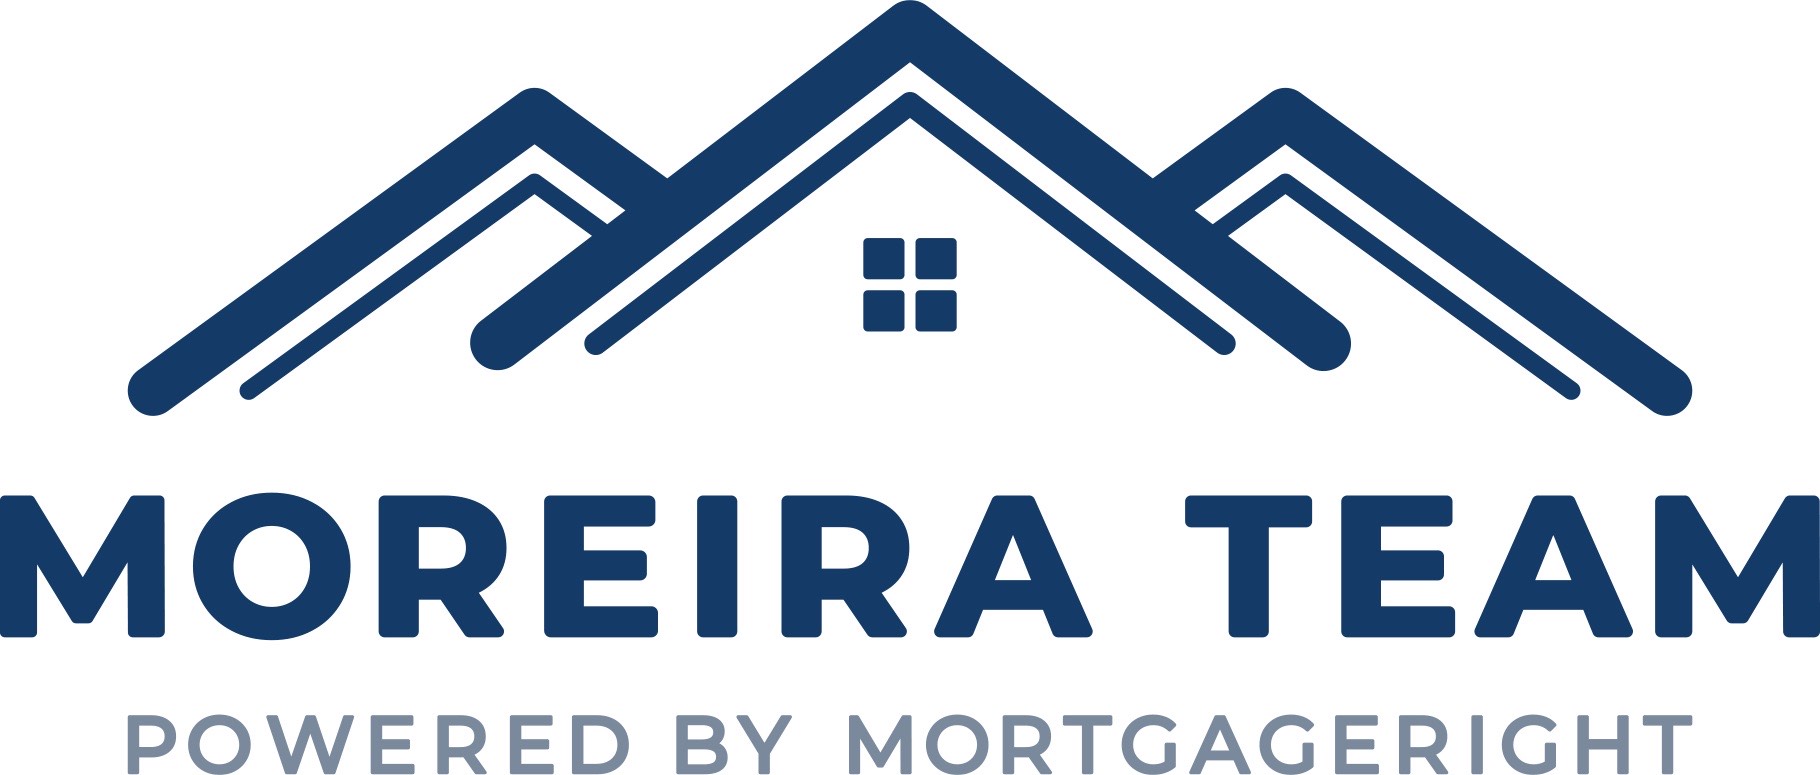 Moreira Team | MortgageRight, Wednesday, January 19, 2022, Press release picture